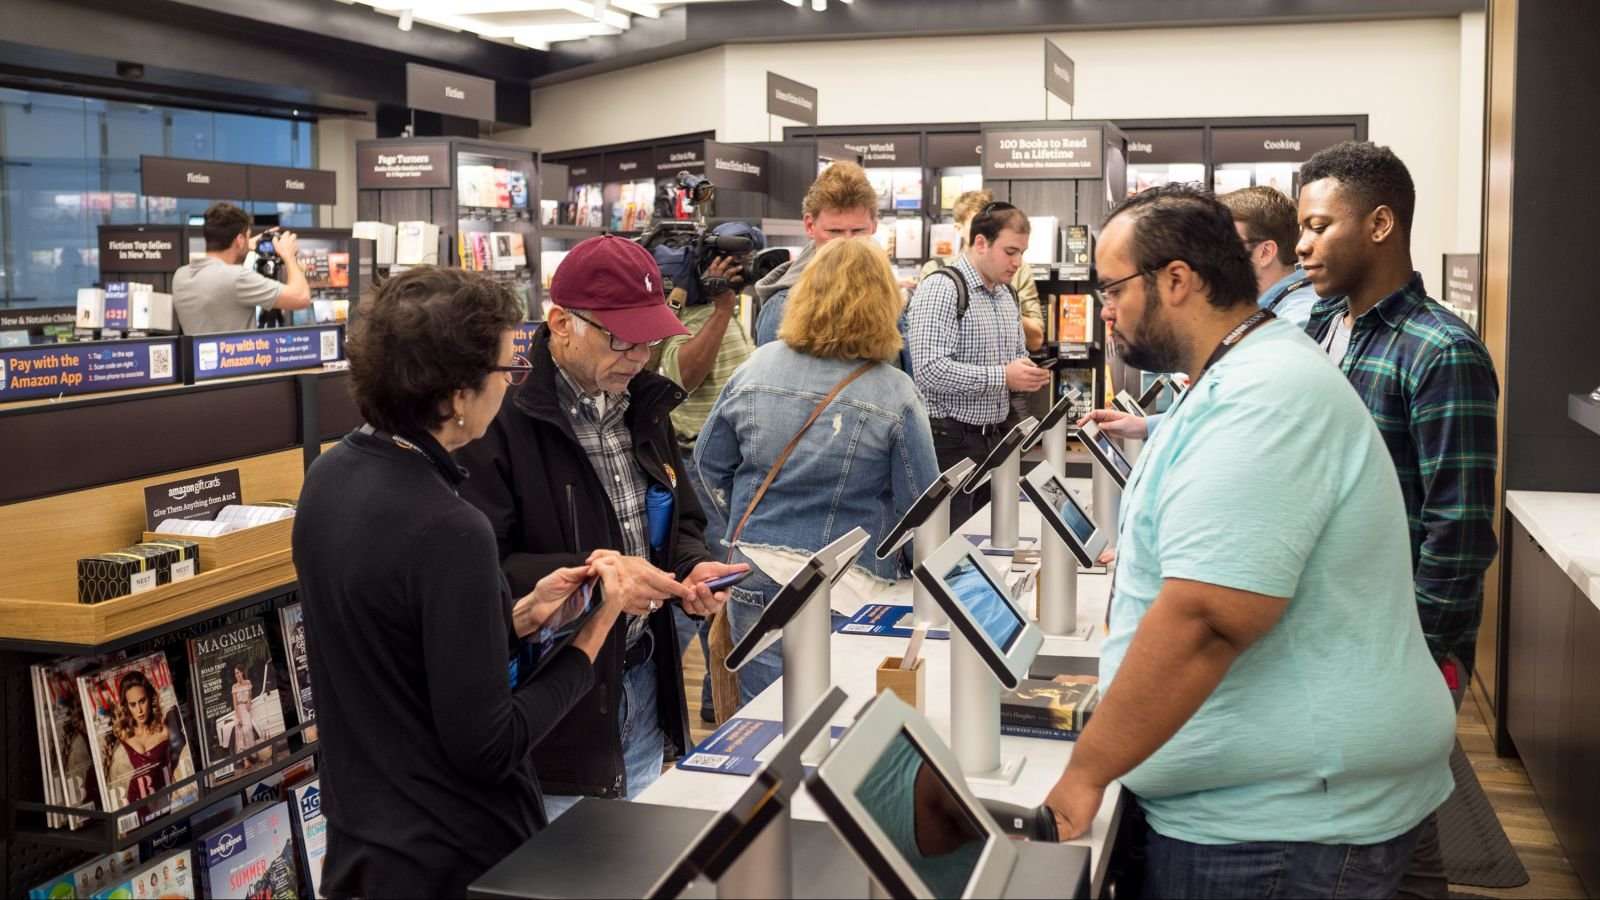 image for Amazon’s first bookstore in New York City sucks the joy out of buying books